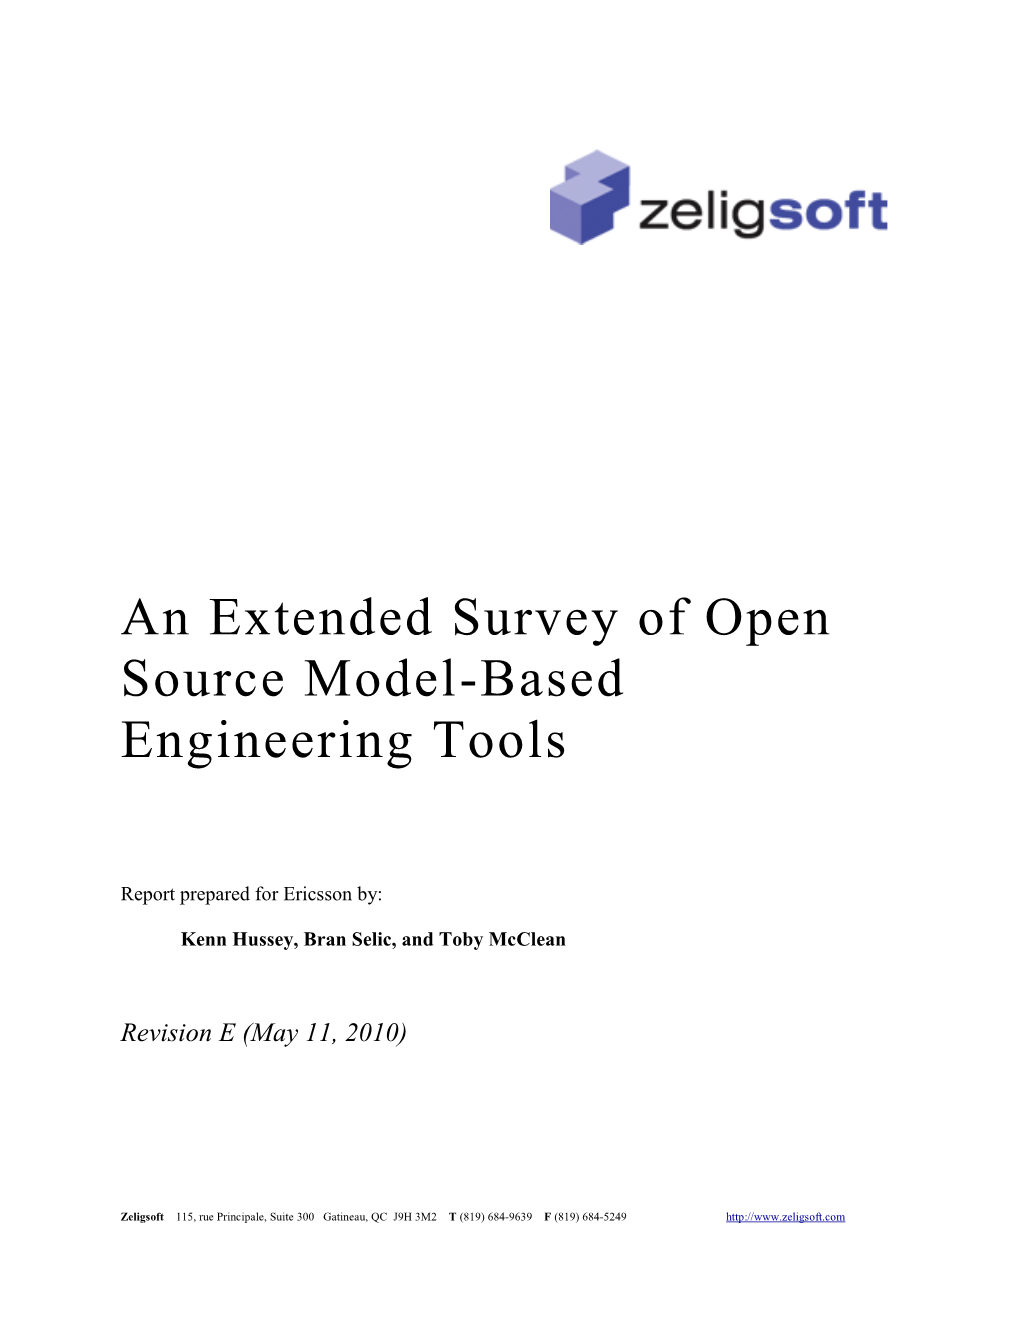 An Extended Survey of Open Source Model-Based Engineering Tools